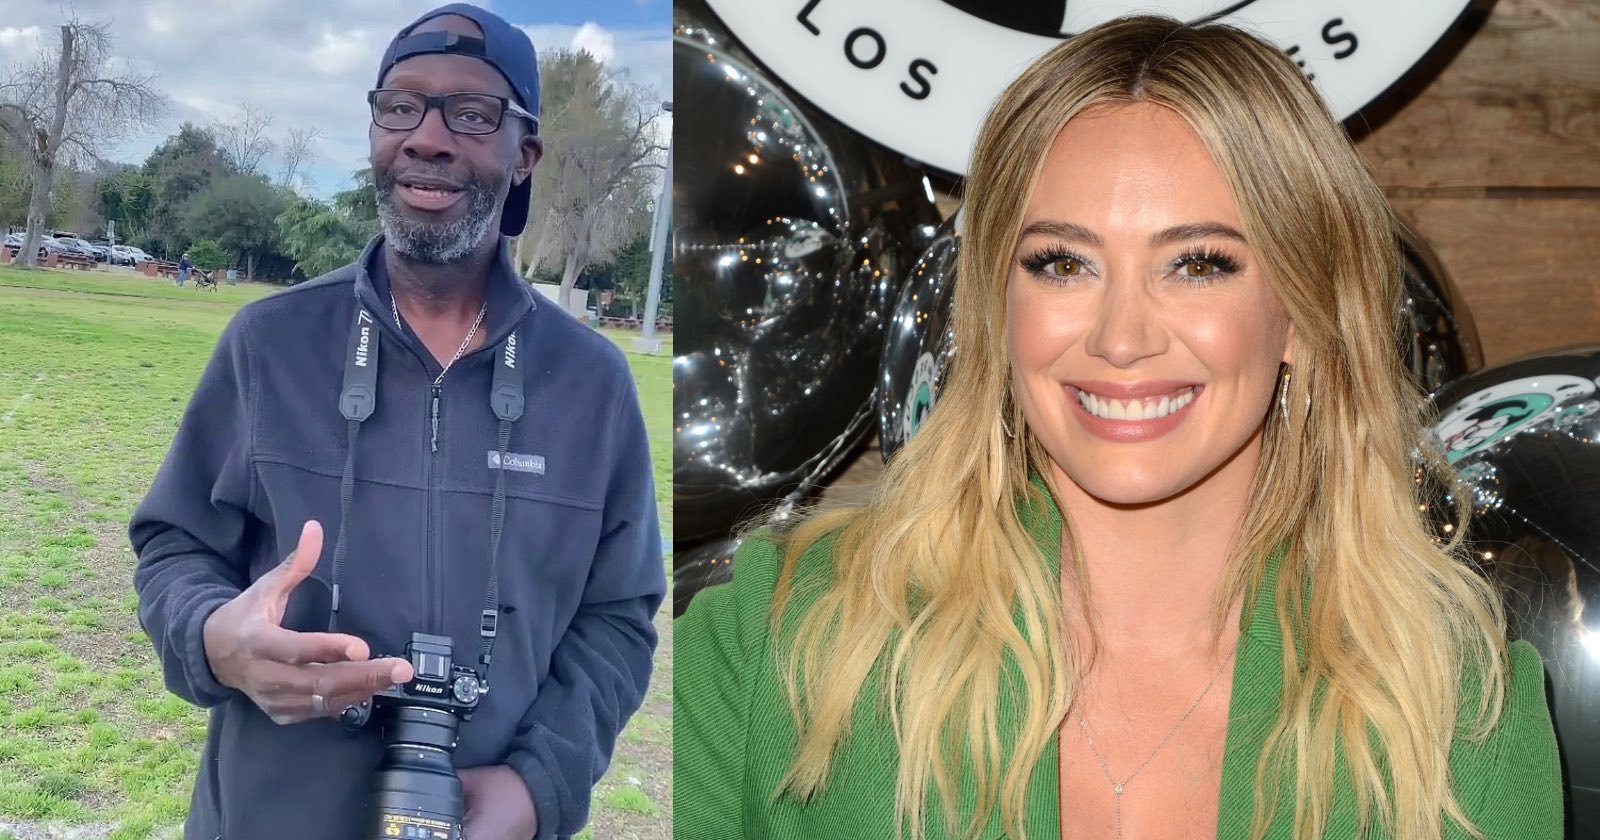 Photographer Who Sued Hilary Duff Over Creep Claim Has Died